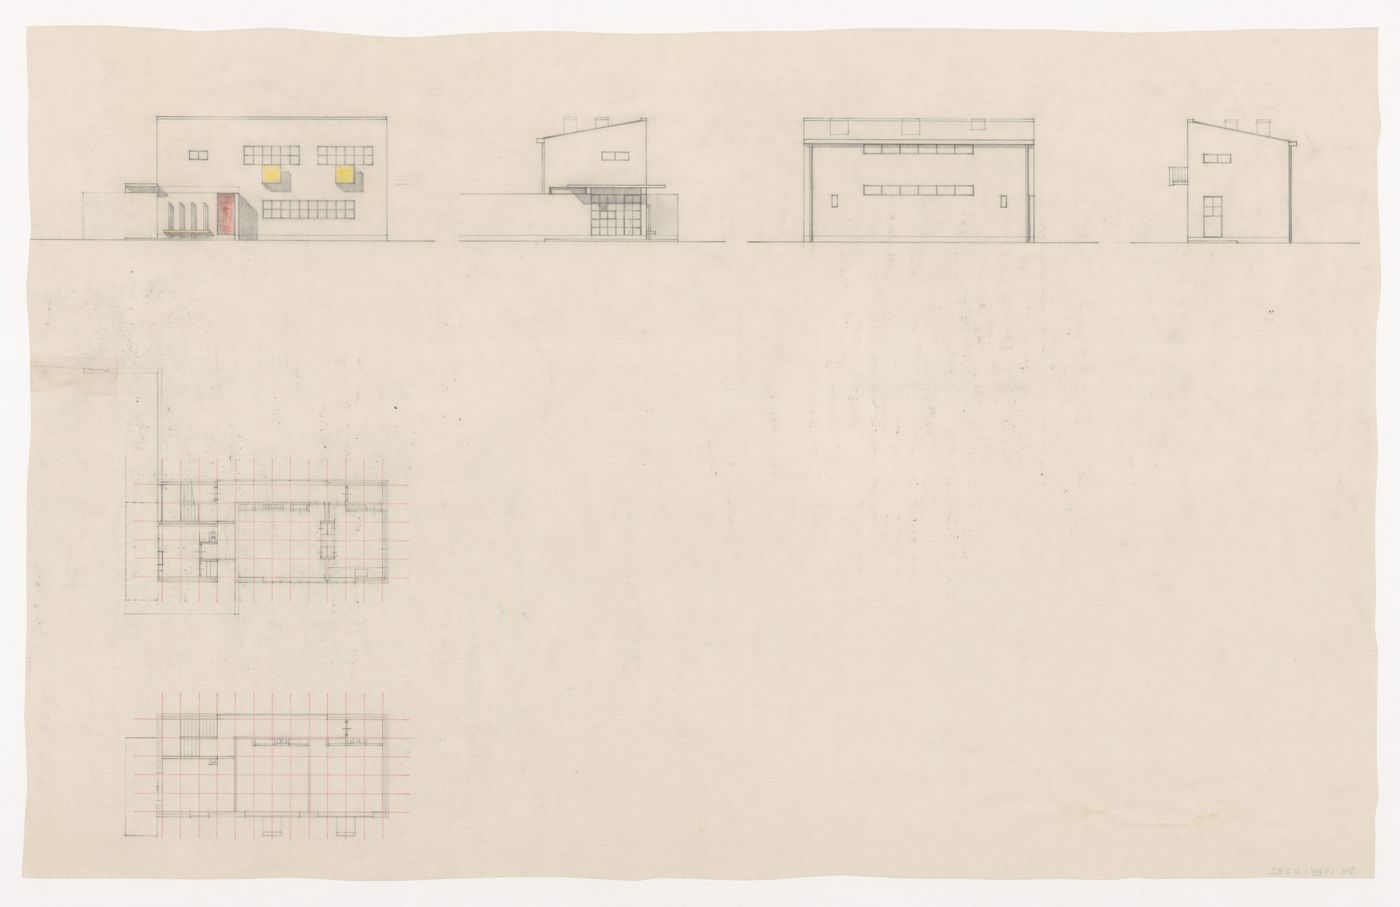 Ground and first floor plans and elevations for De Hoge Veluwe park-keeper's house, Otterloo, Netherlands